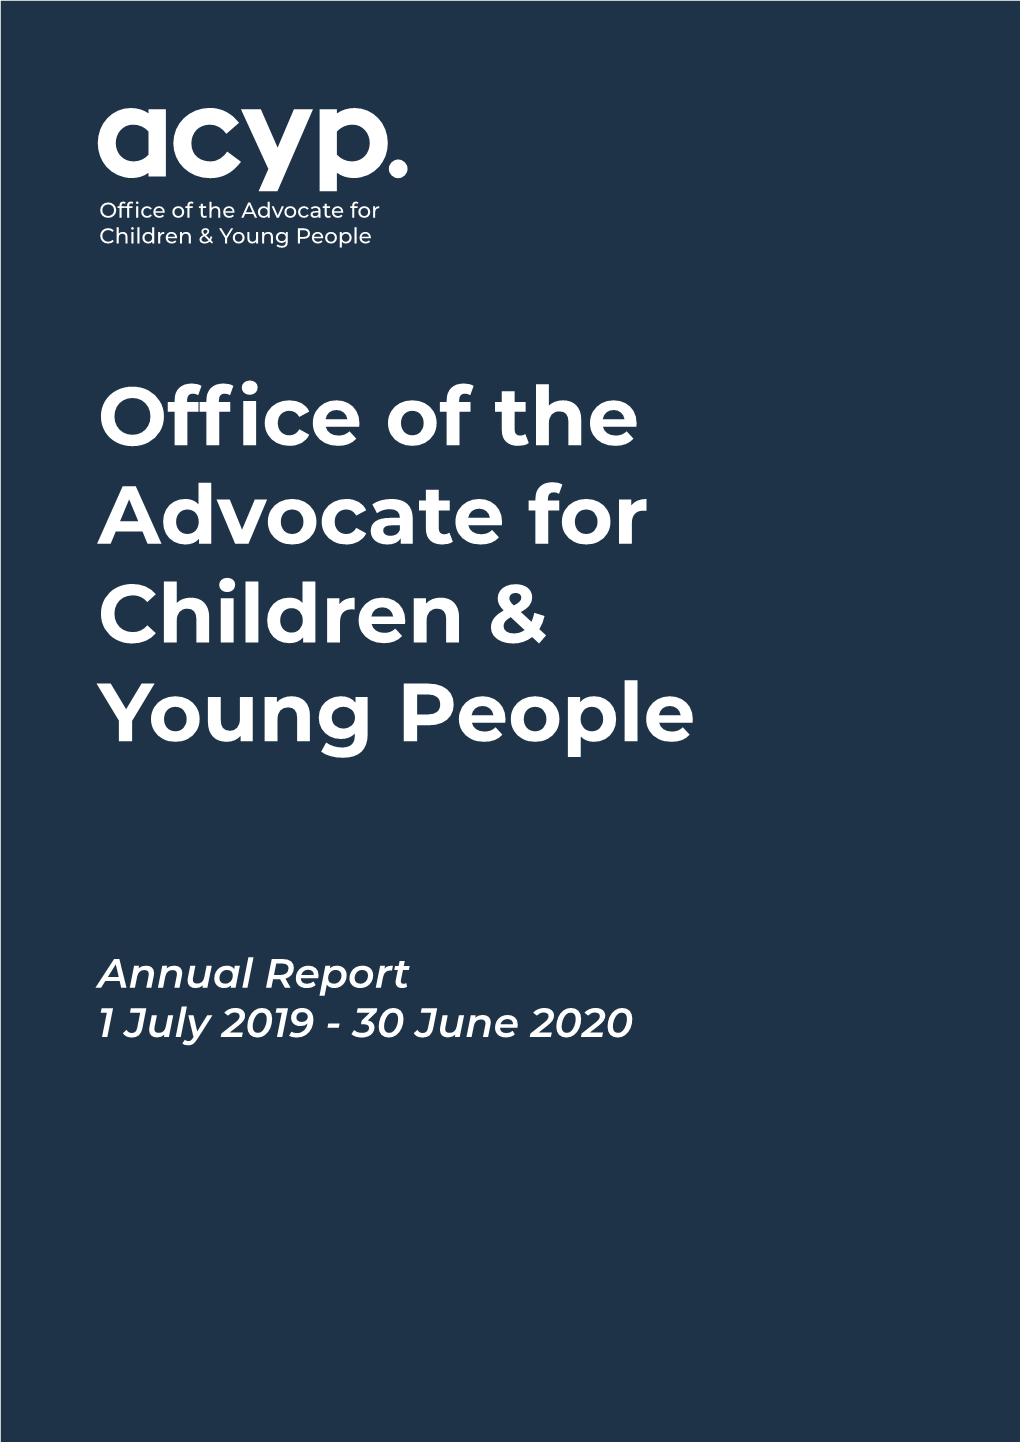 Office of the Advocate for Children & Young People